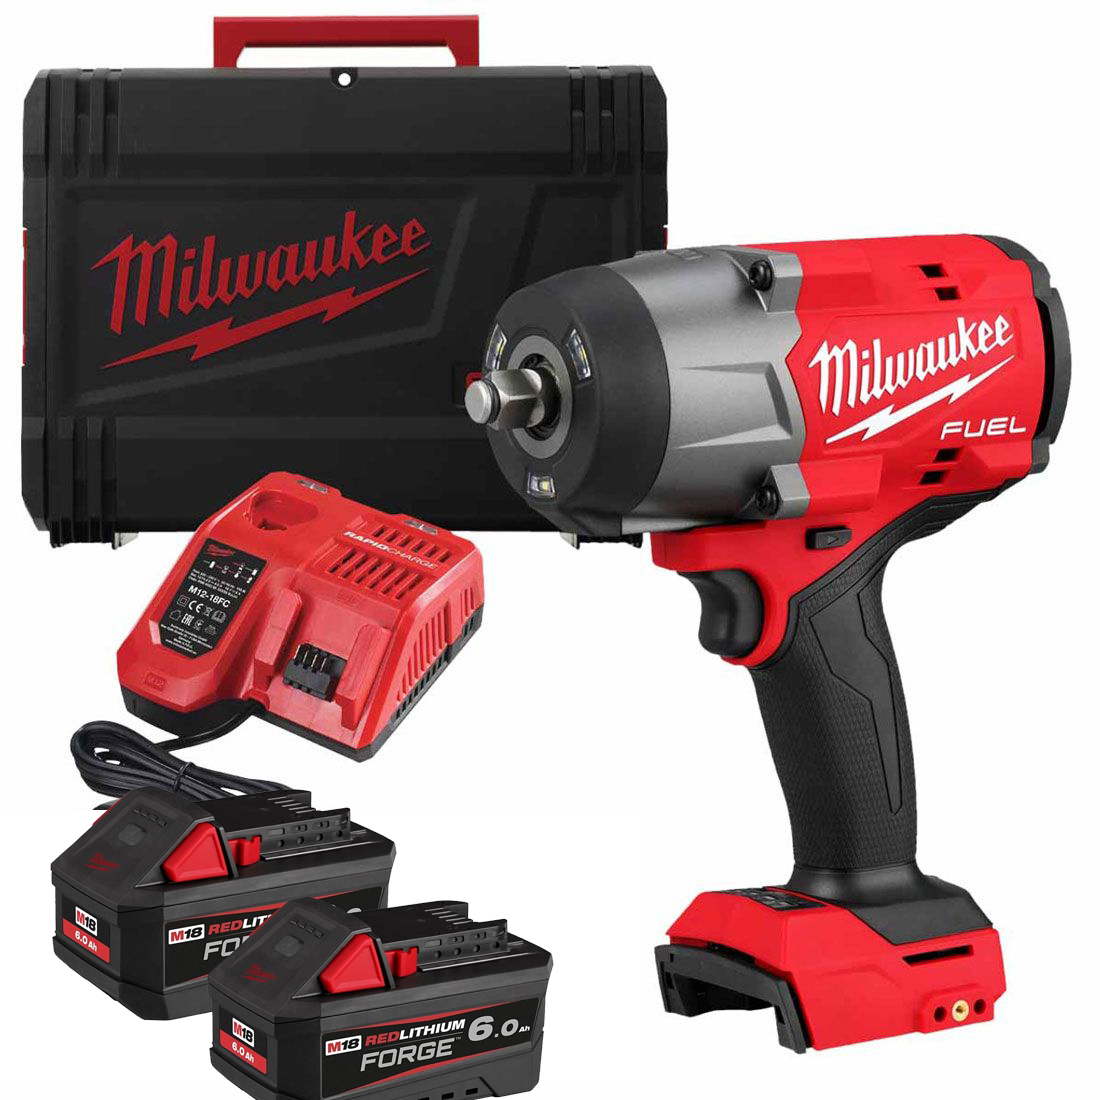 Milwaukee 18V Fuel High Torque 1/2 Impact Wrench - M18FHIW2F12-602FX - 6.0ah Forge